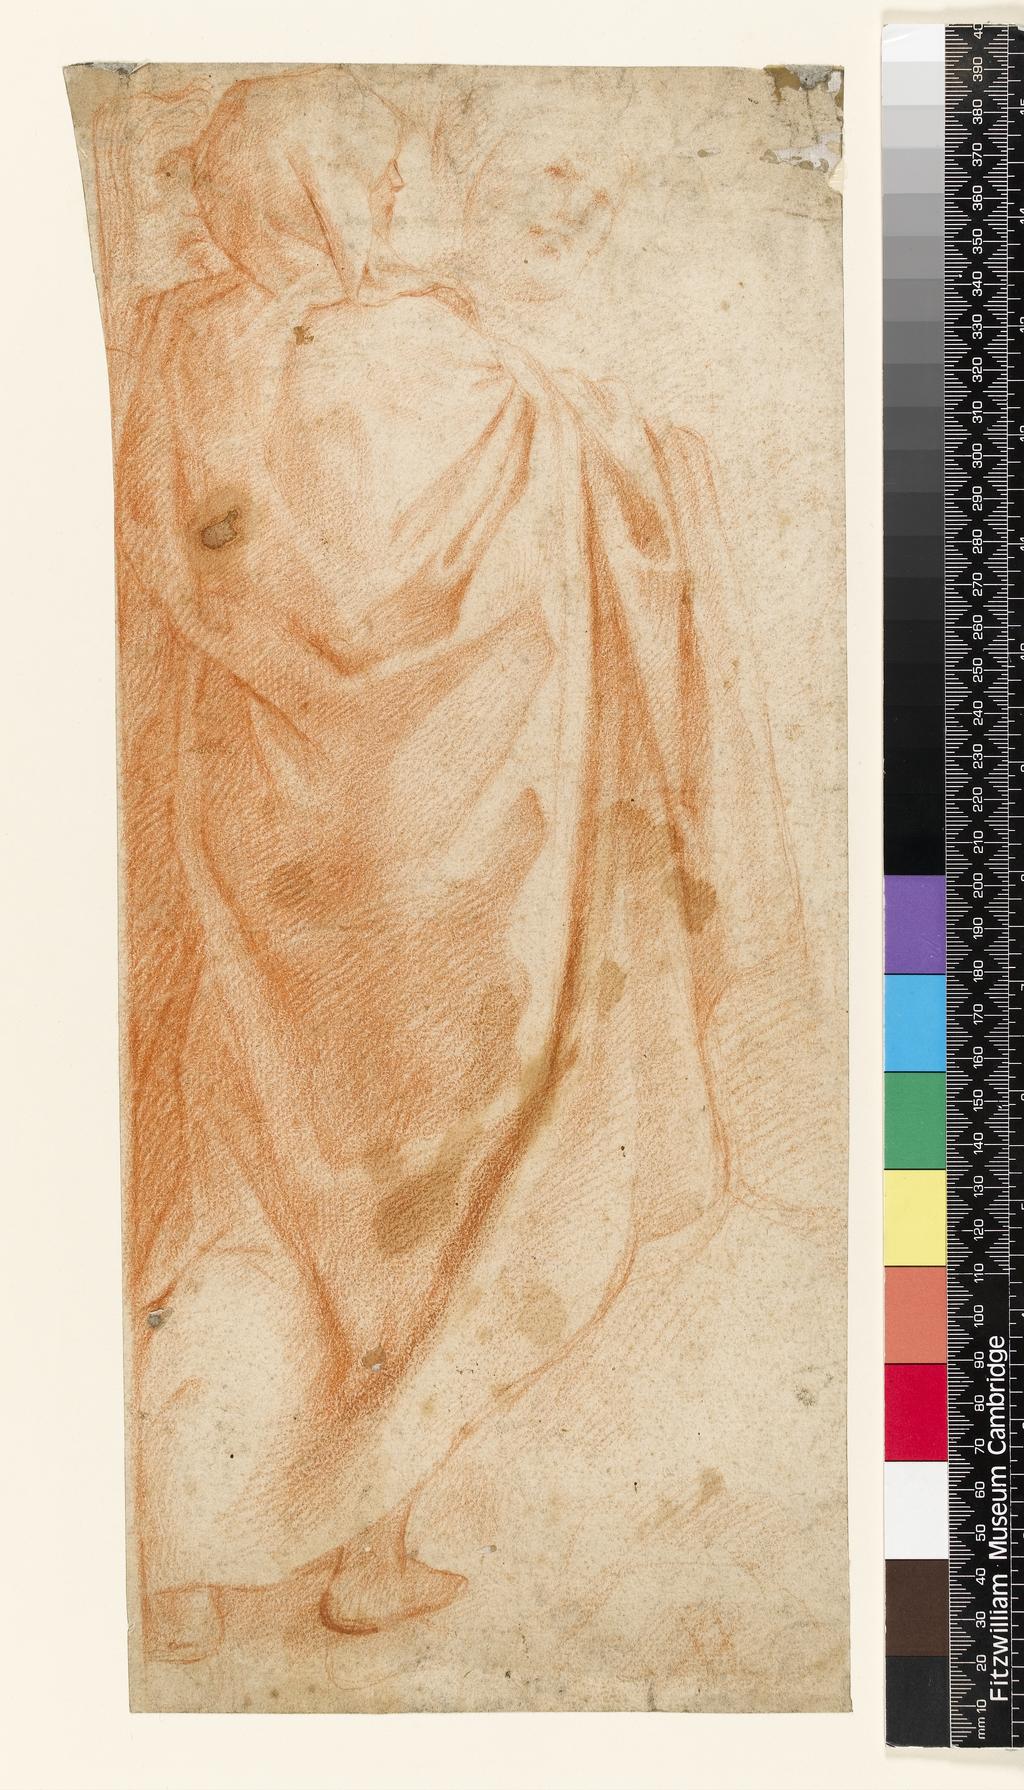 An image of Title/s: Study of two standing, draped, figures Maker/s: SARTO, Andrea del, after. Florence 1486-1531 FlorenceTechnique Description: red chalk on paper Dimensions: height: 384 mm, width: 180 mm